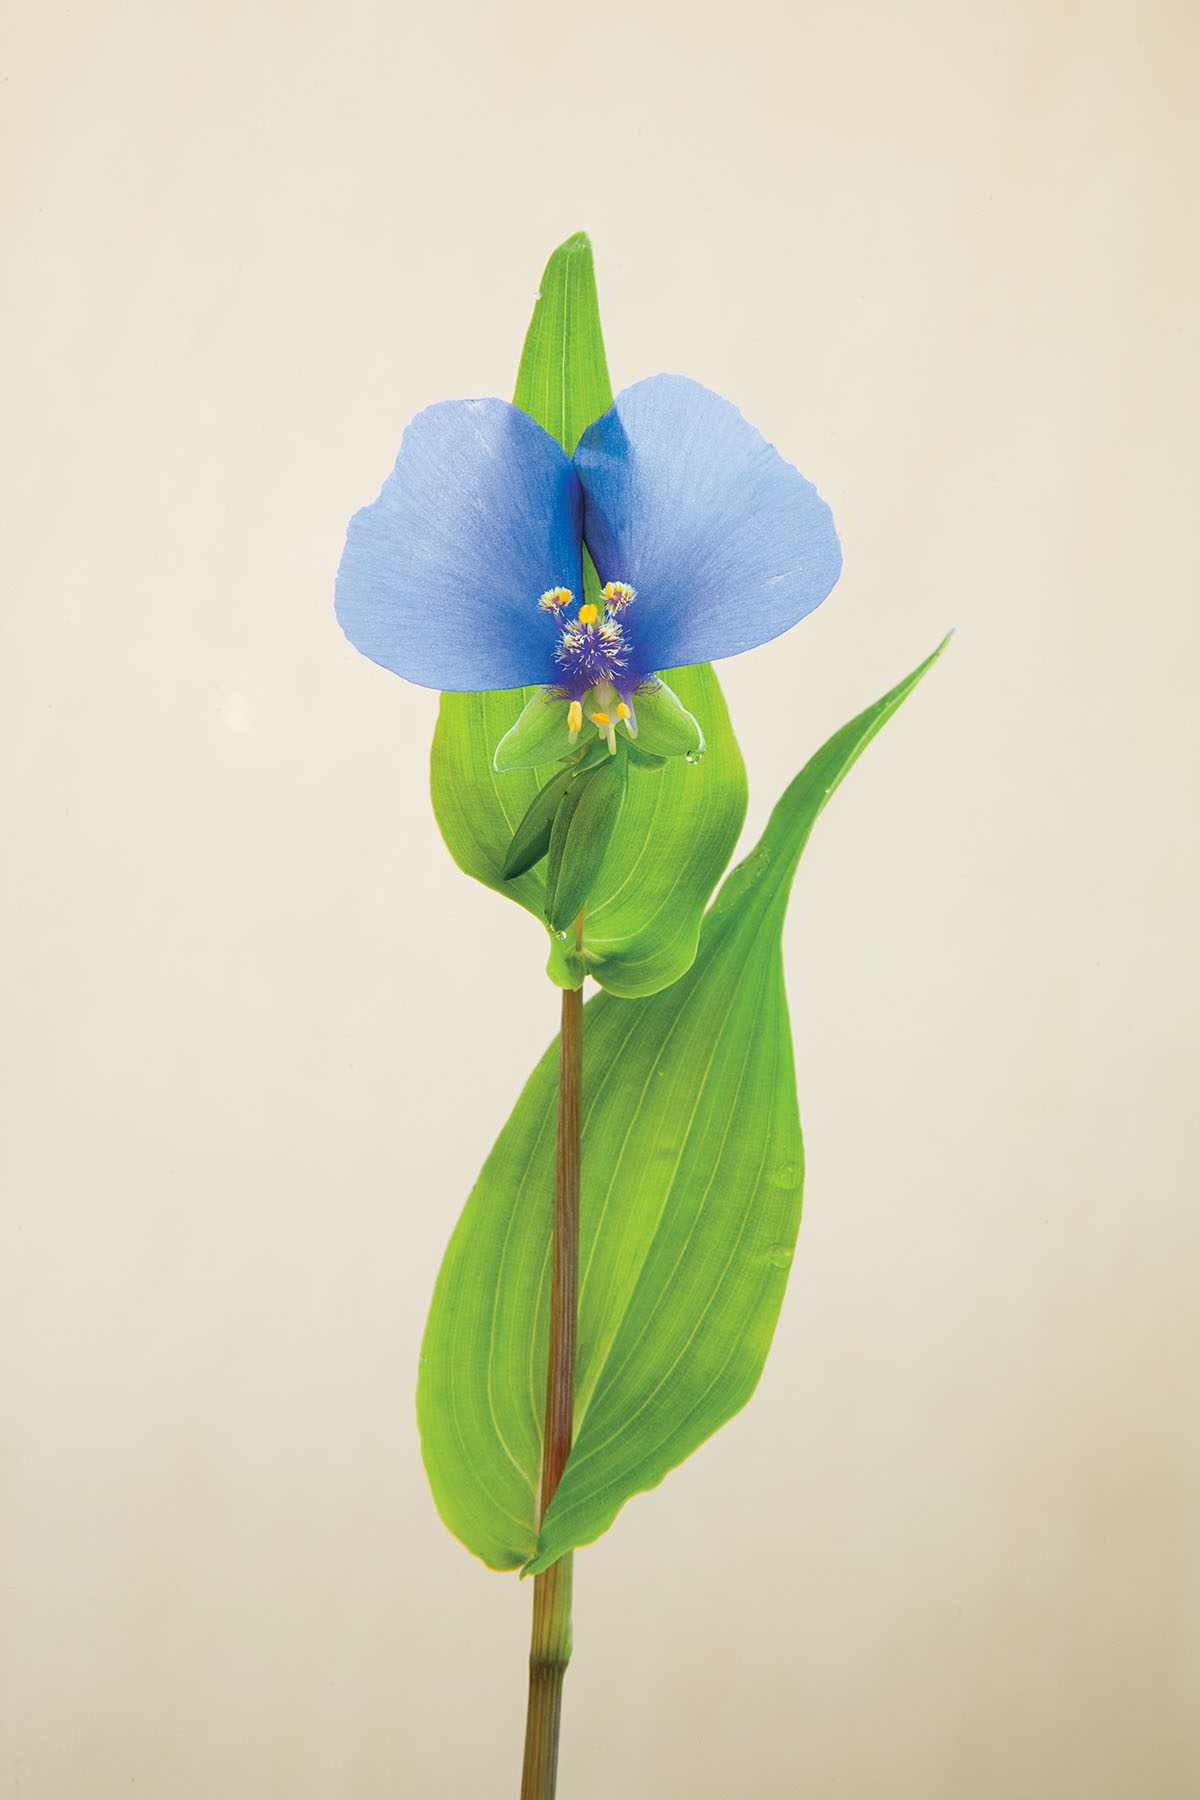 An elegant photograph of a baby-blue flower with green leaves on an off-white background